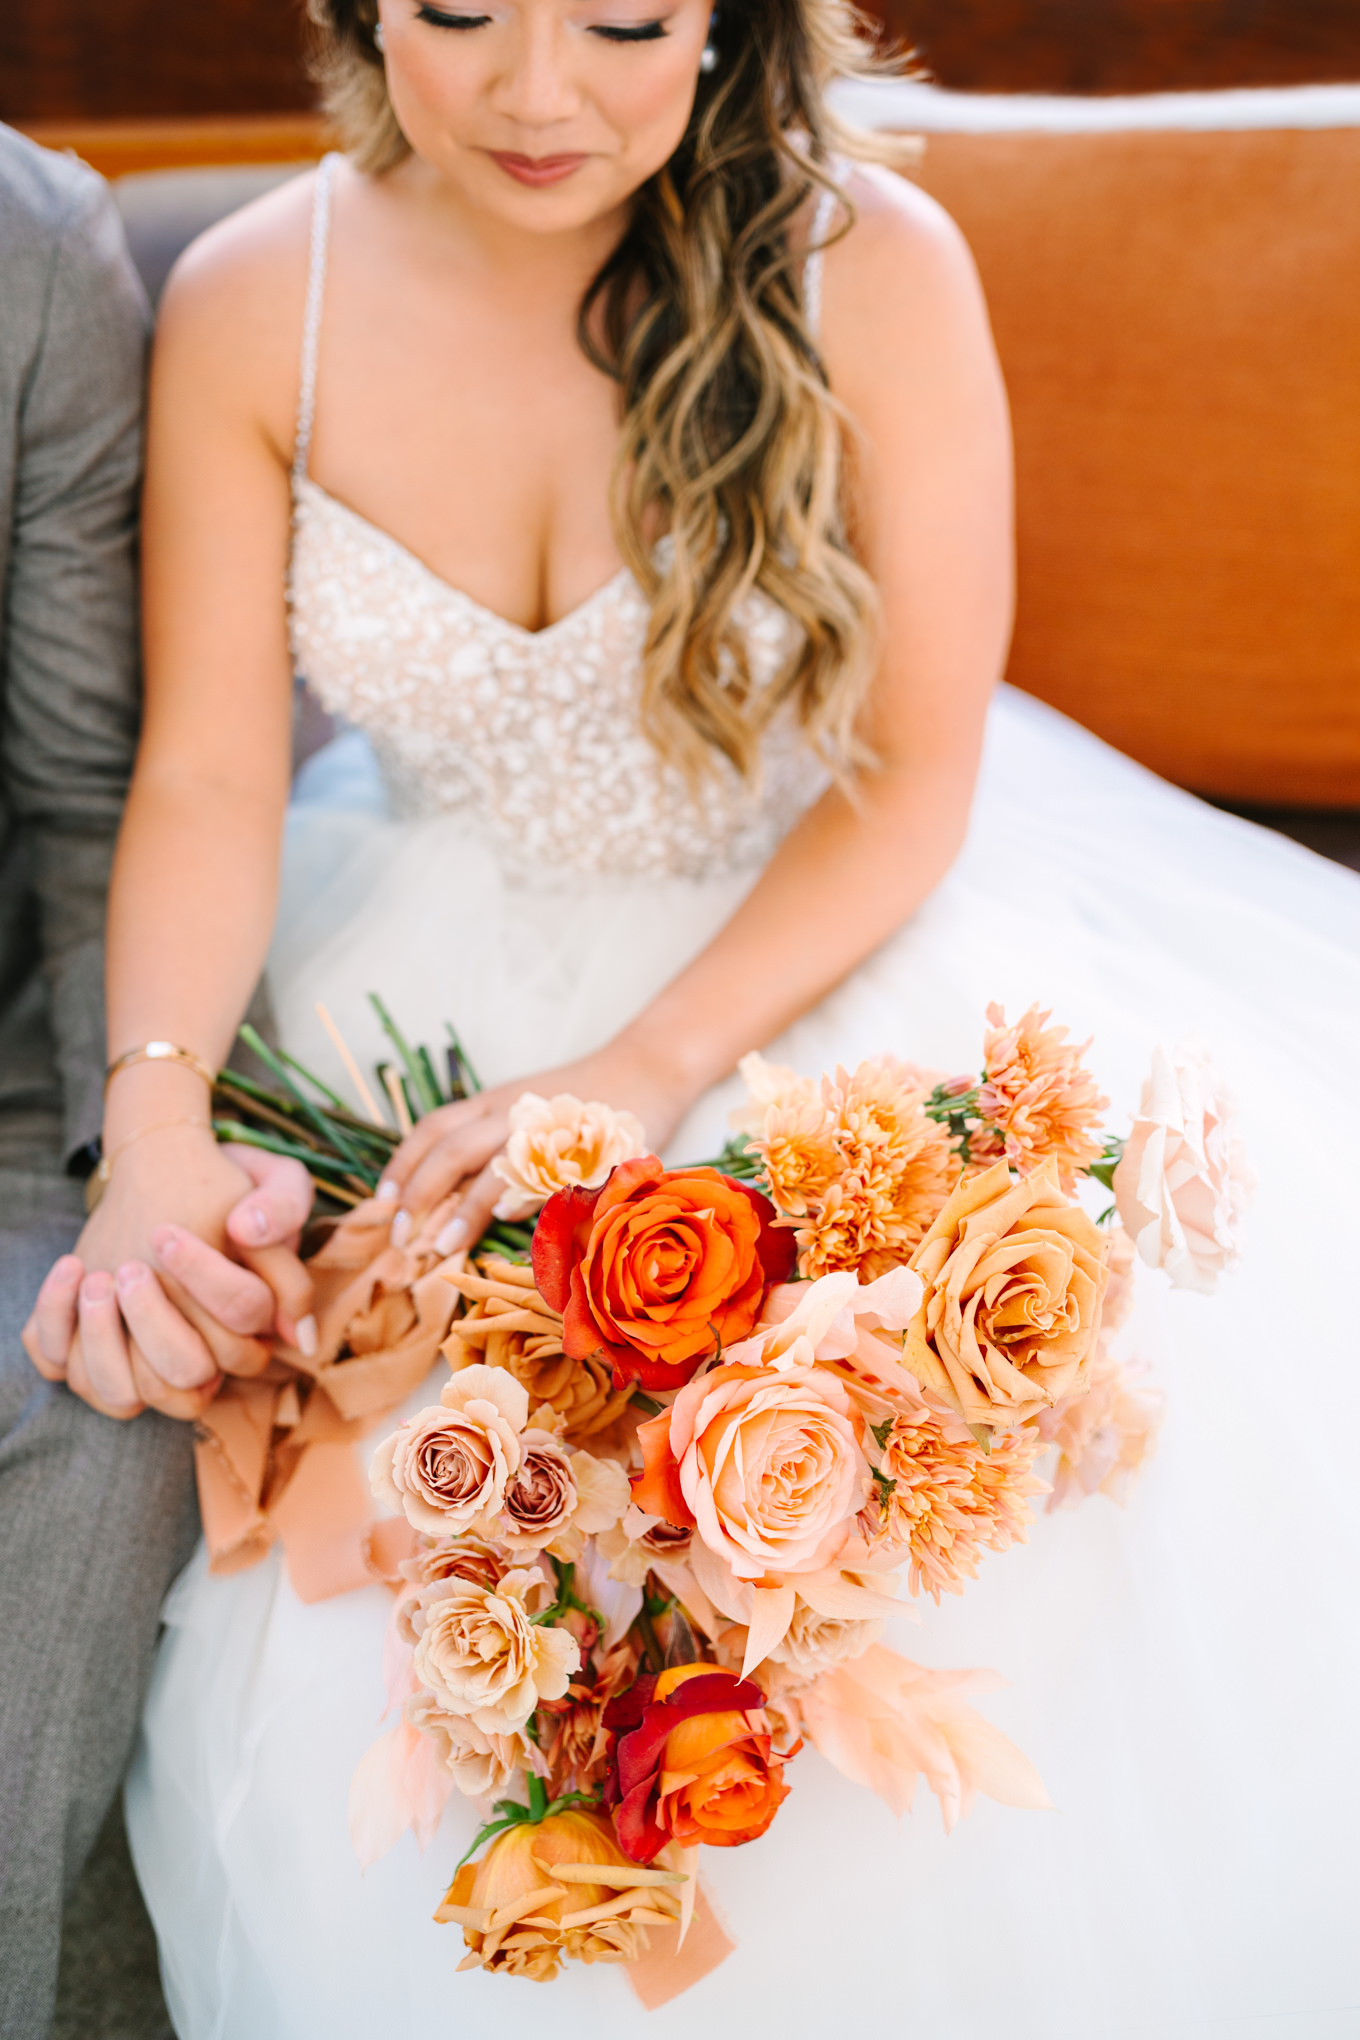 Close up of orange and pink bridal bouquet | Pink and orange Lautner Compound wedding | Colorful Palm Springs wedding photography | #palmspringsphotographer #palmspringswedding #lautnercompound #southerncaliforniawedding  Source: Mary Costa Photography | Los Angeles